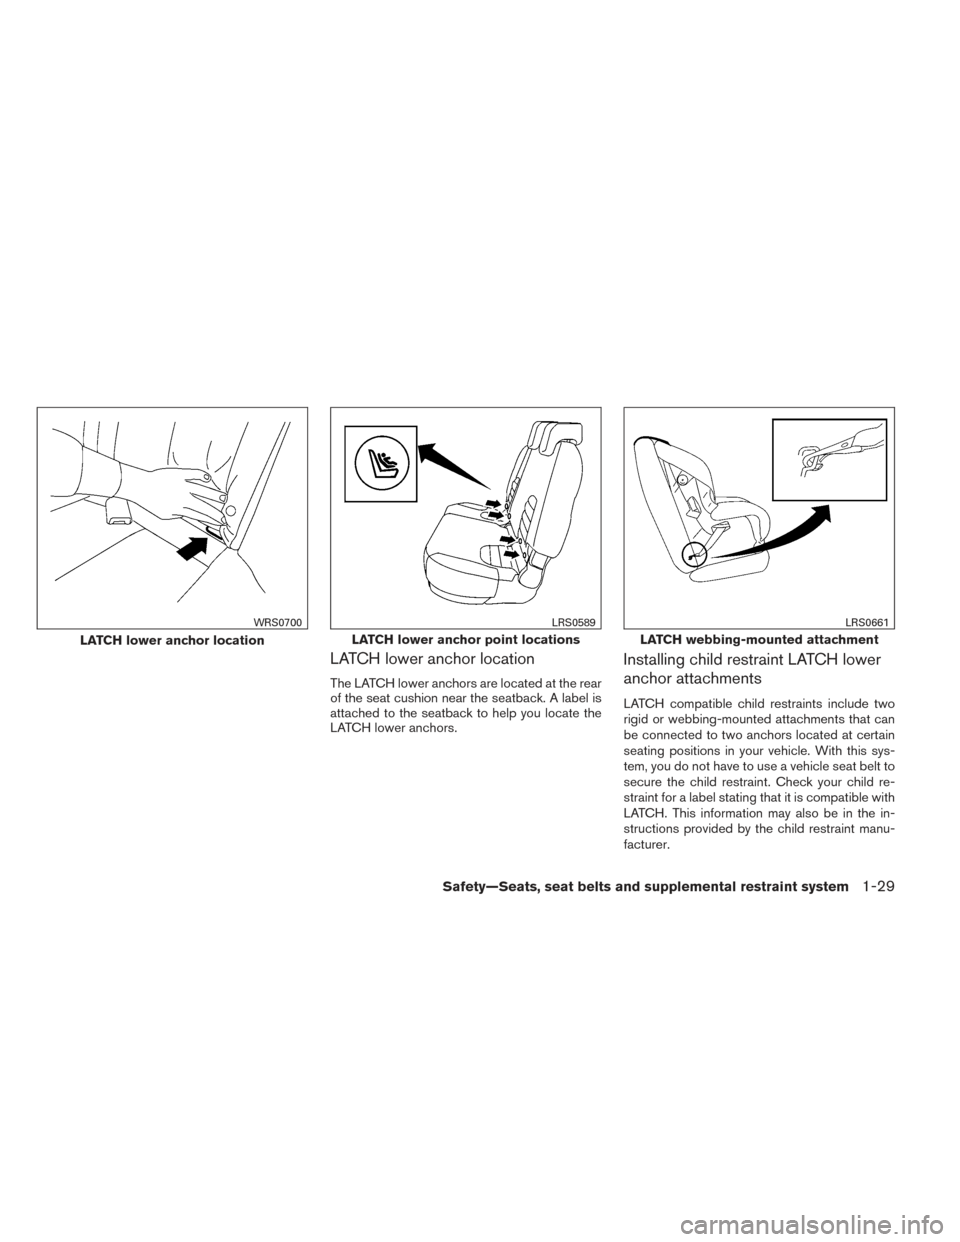 NISSAN XTERRA 2014 N50 / 2.G Service Manual LATCH lower anchor location
The LATCH lower anchors are located at the rear
of the seat cushion near the seatback. A label is
attached to the seatback to help you locate the
LATCH lower anchors.
Insta